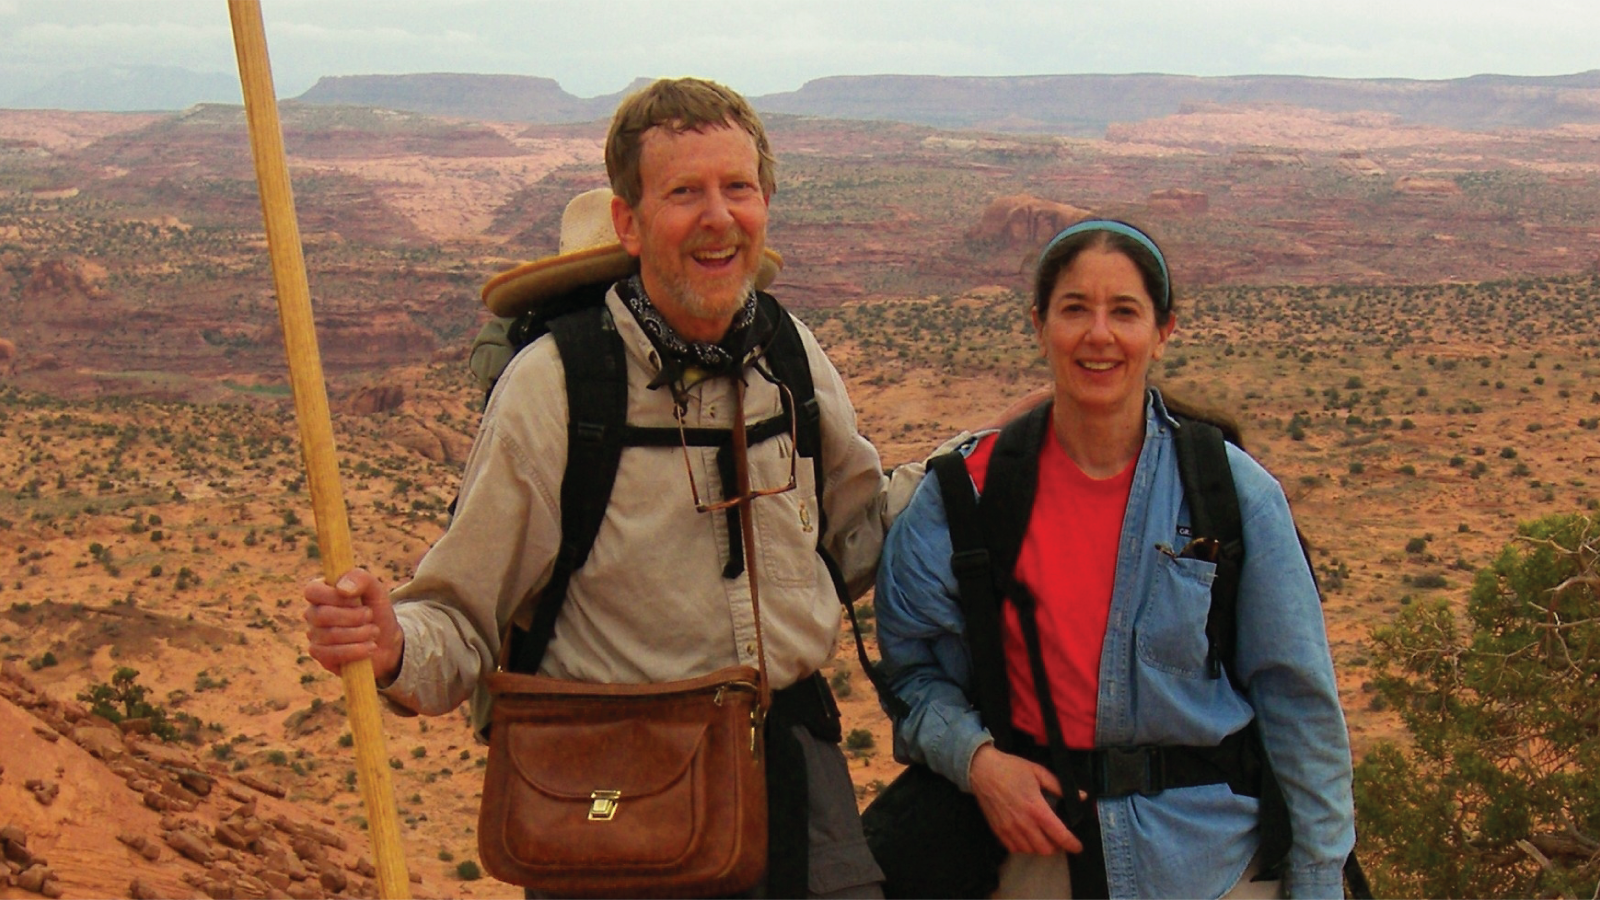 Mahoney and his wife on a hike in a desert